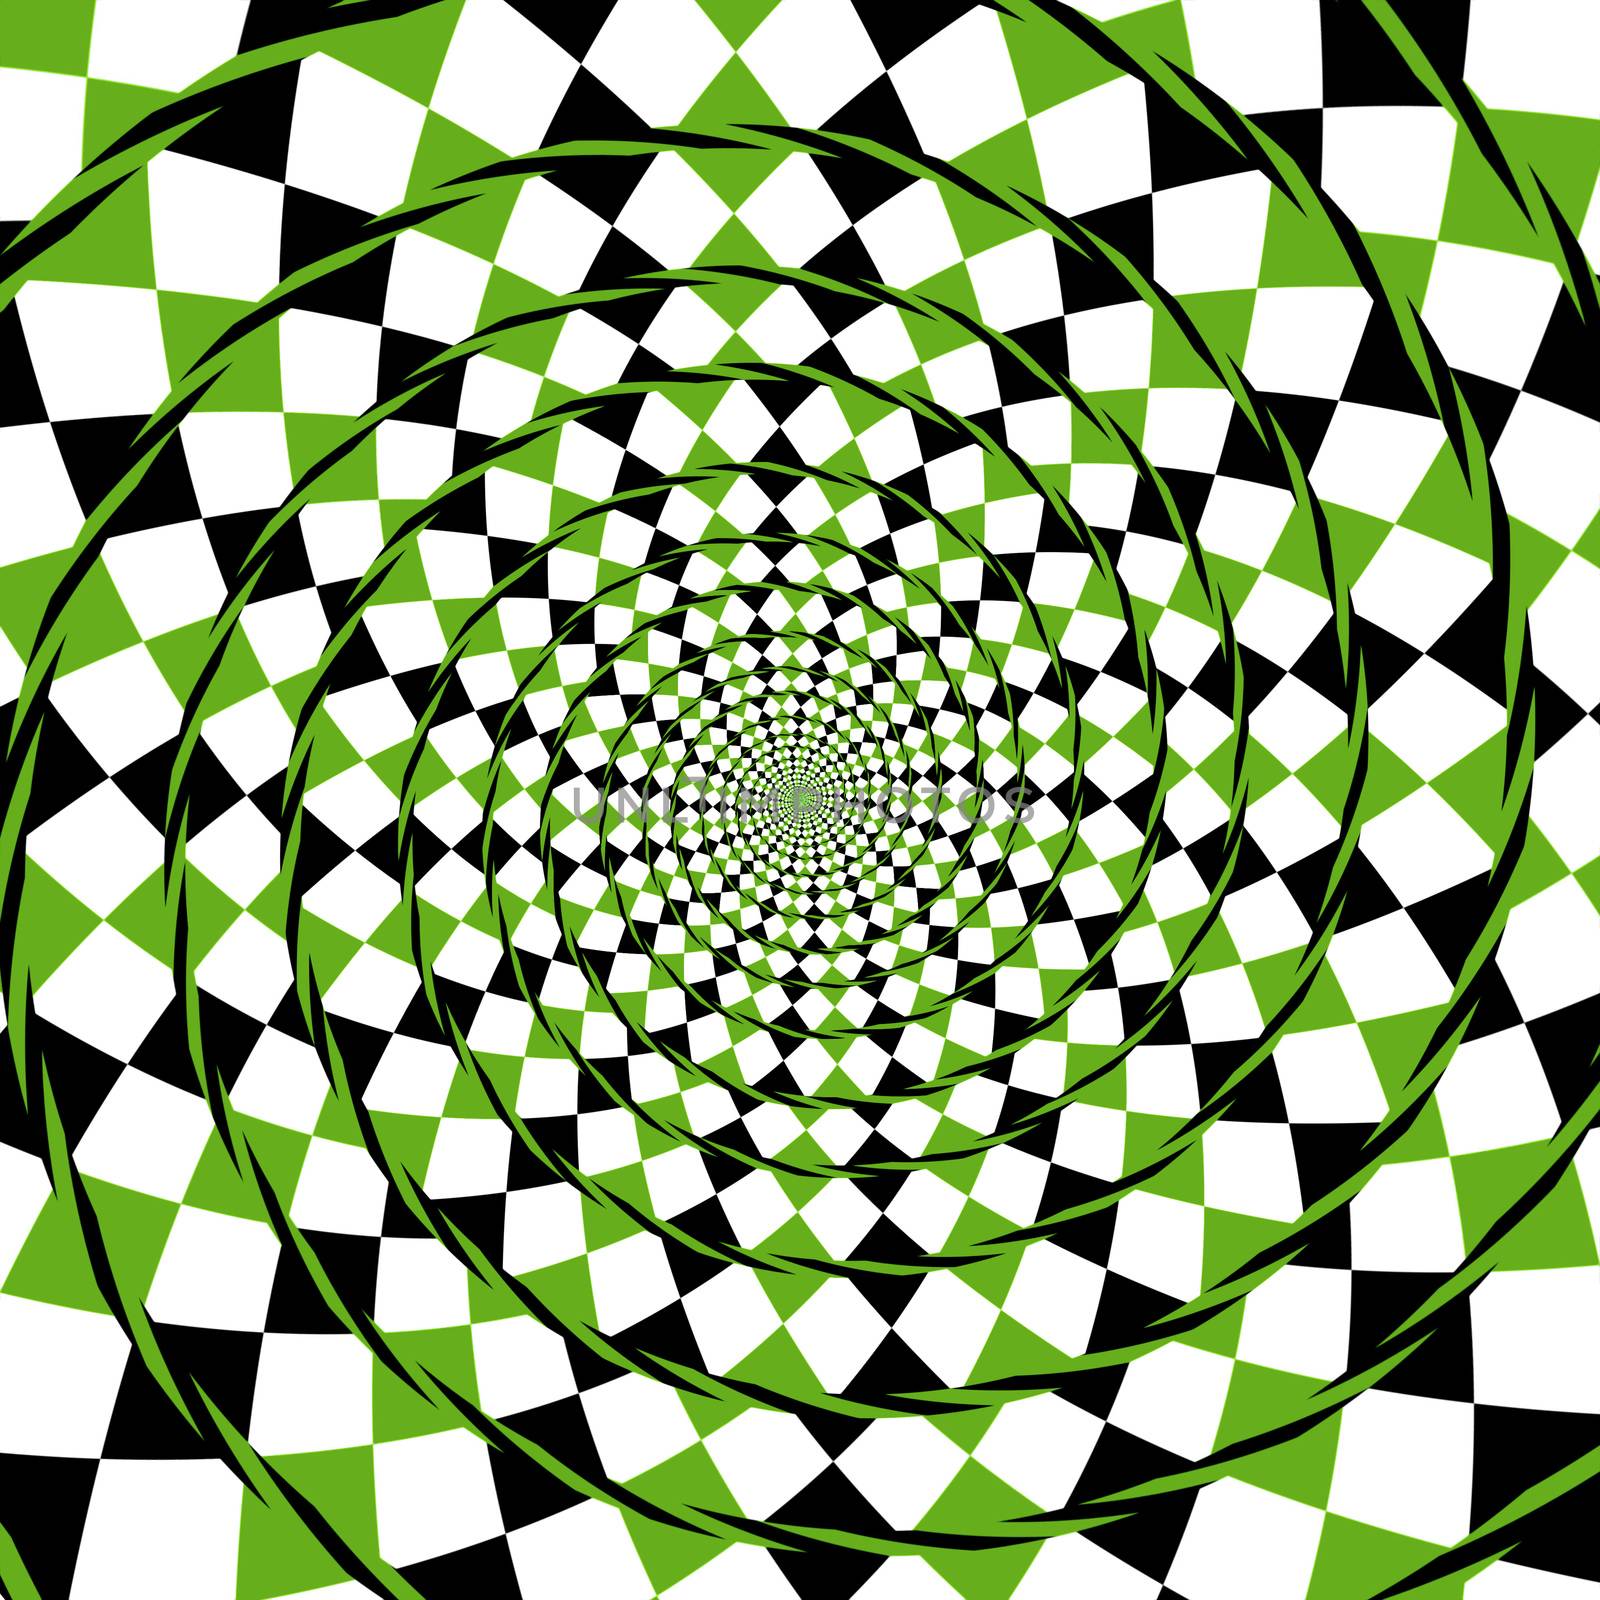 An illustration of an optical illusion spiral background